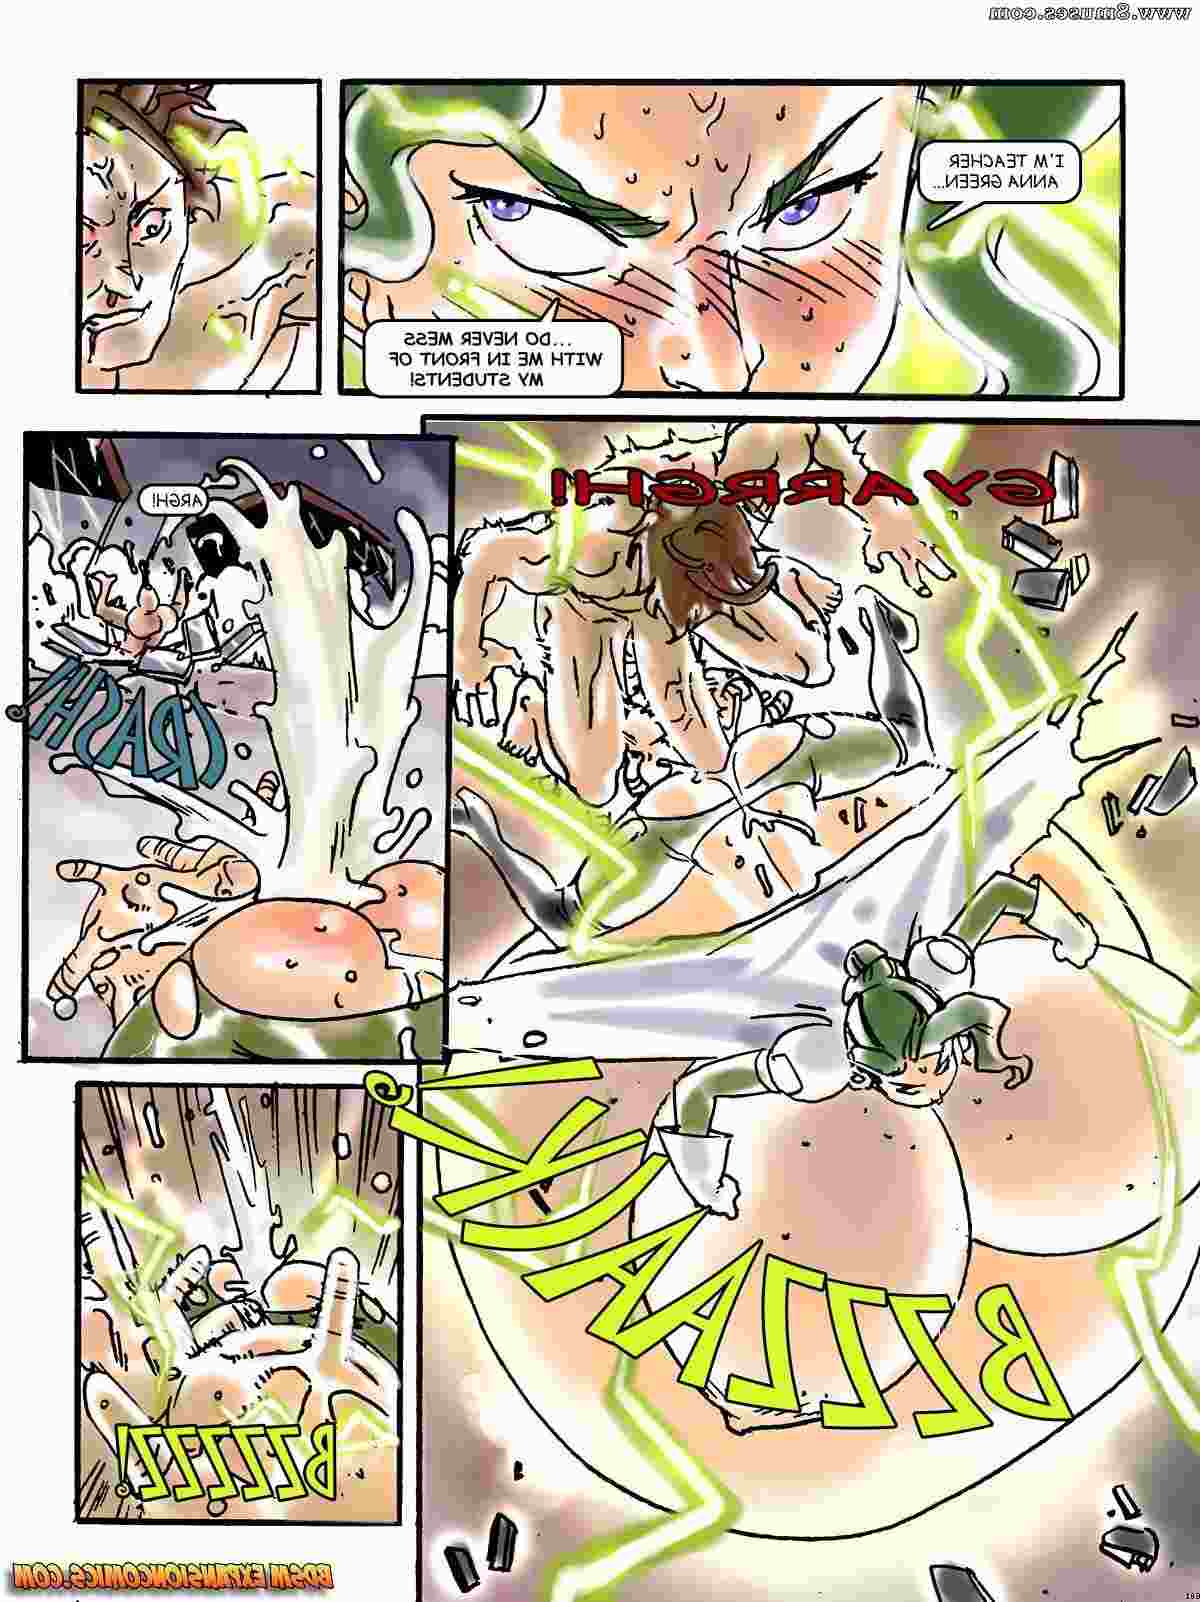 Expansion-Comics/Swelling-invasion Swelling_invasion__8muses_-_Sex_and_Porn_Comics_17.jpg